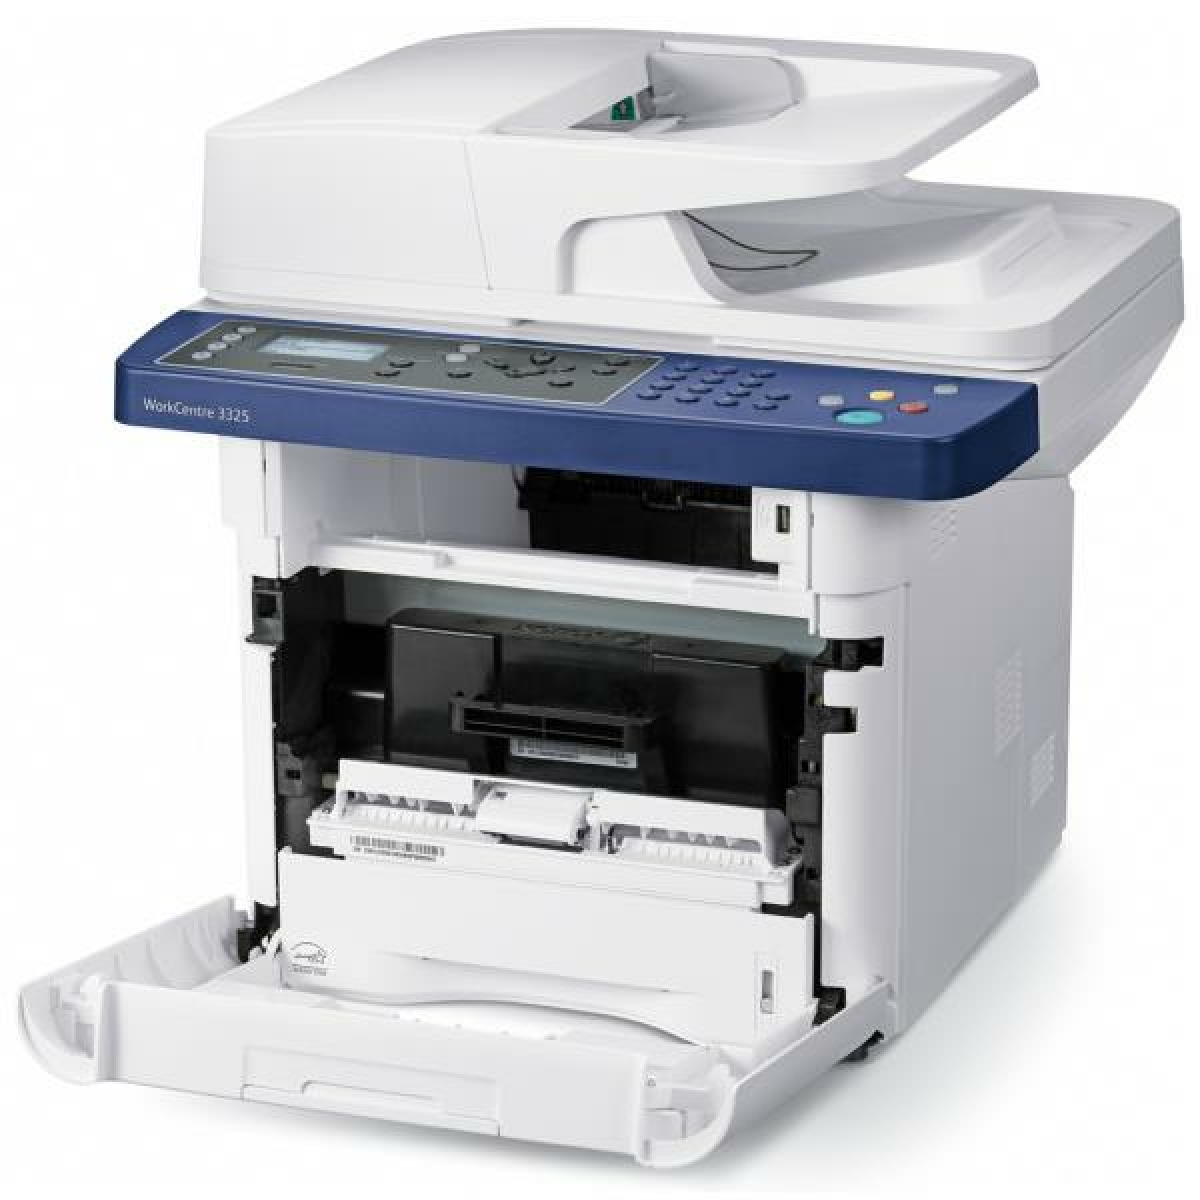 All in one Printer Xerox 3325 Open Box Ethernet Rj-11 Usb &lt;10K Pages A4 A5 B/W Laser-Printer LOC 2&quot;